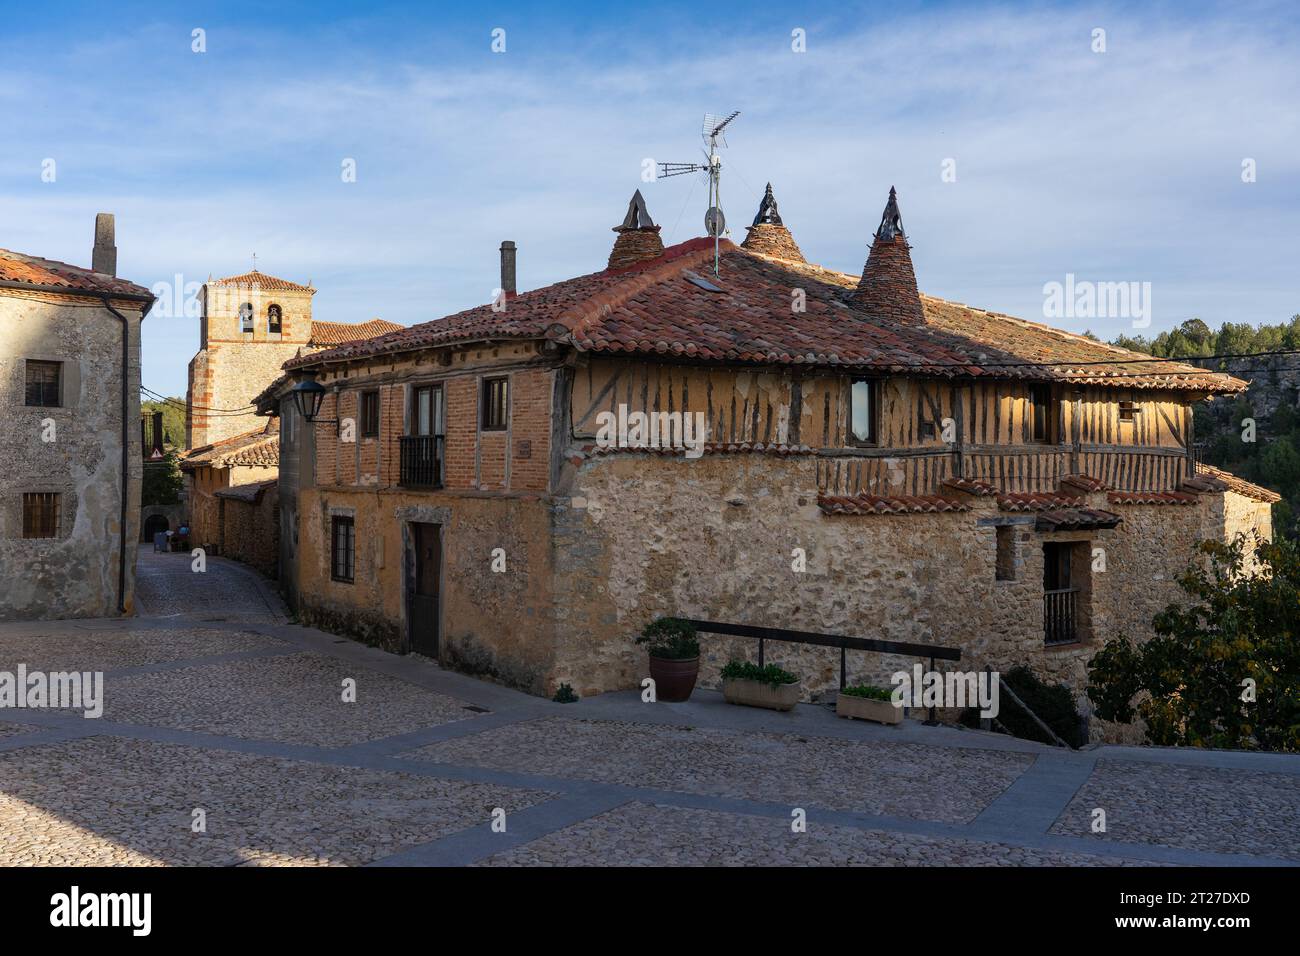 View of the traditional houses of the medieval village of Calatañazor in a sunny day, Soria, Castilla y Leon, Stock Photo